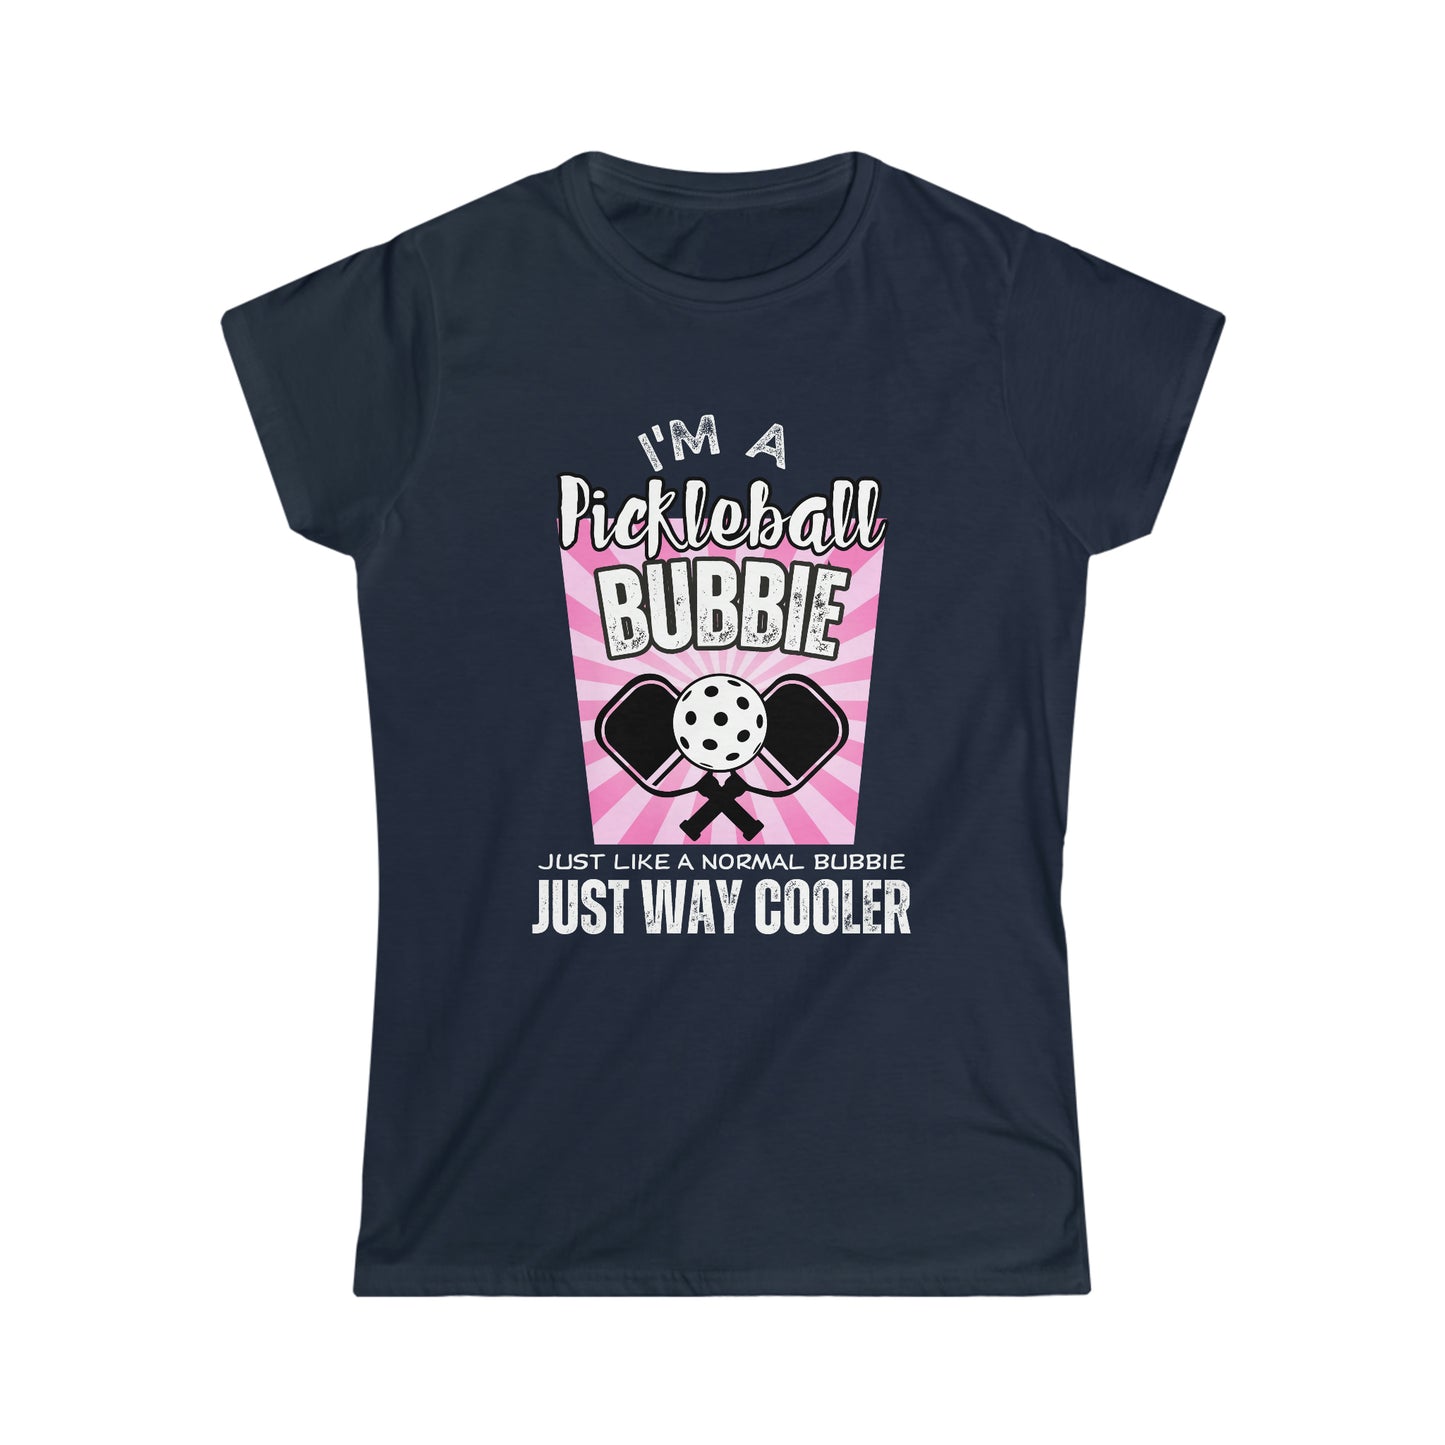 I'm a Pickleball Bubbie - Women's Softstyle Tee 3